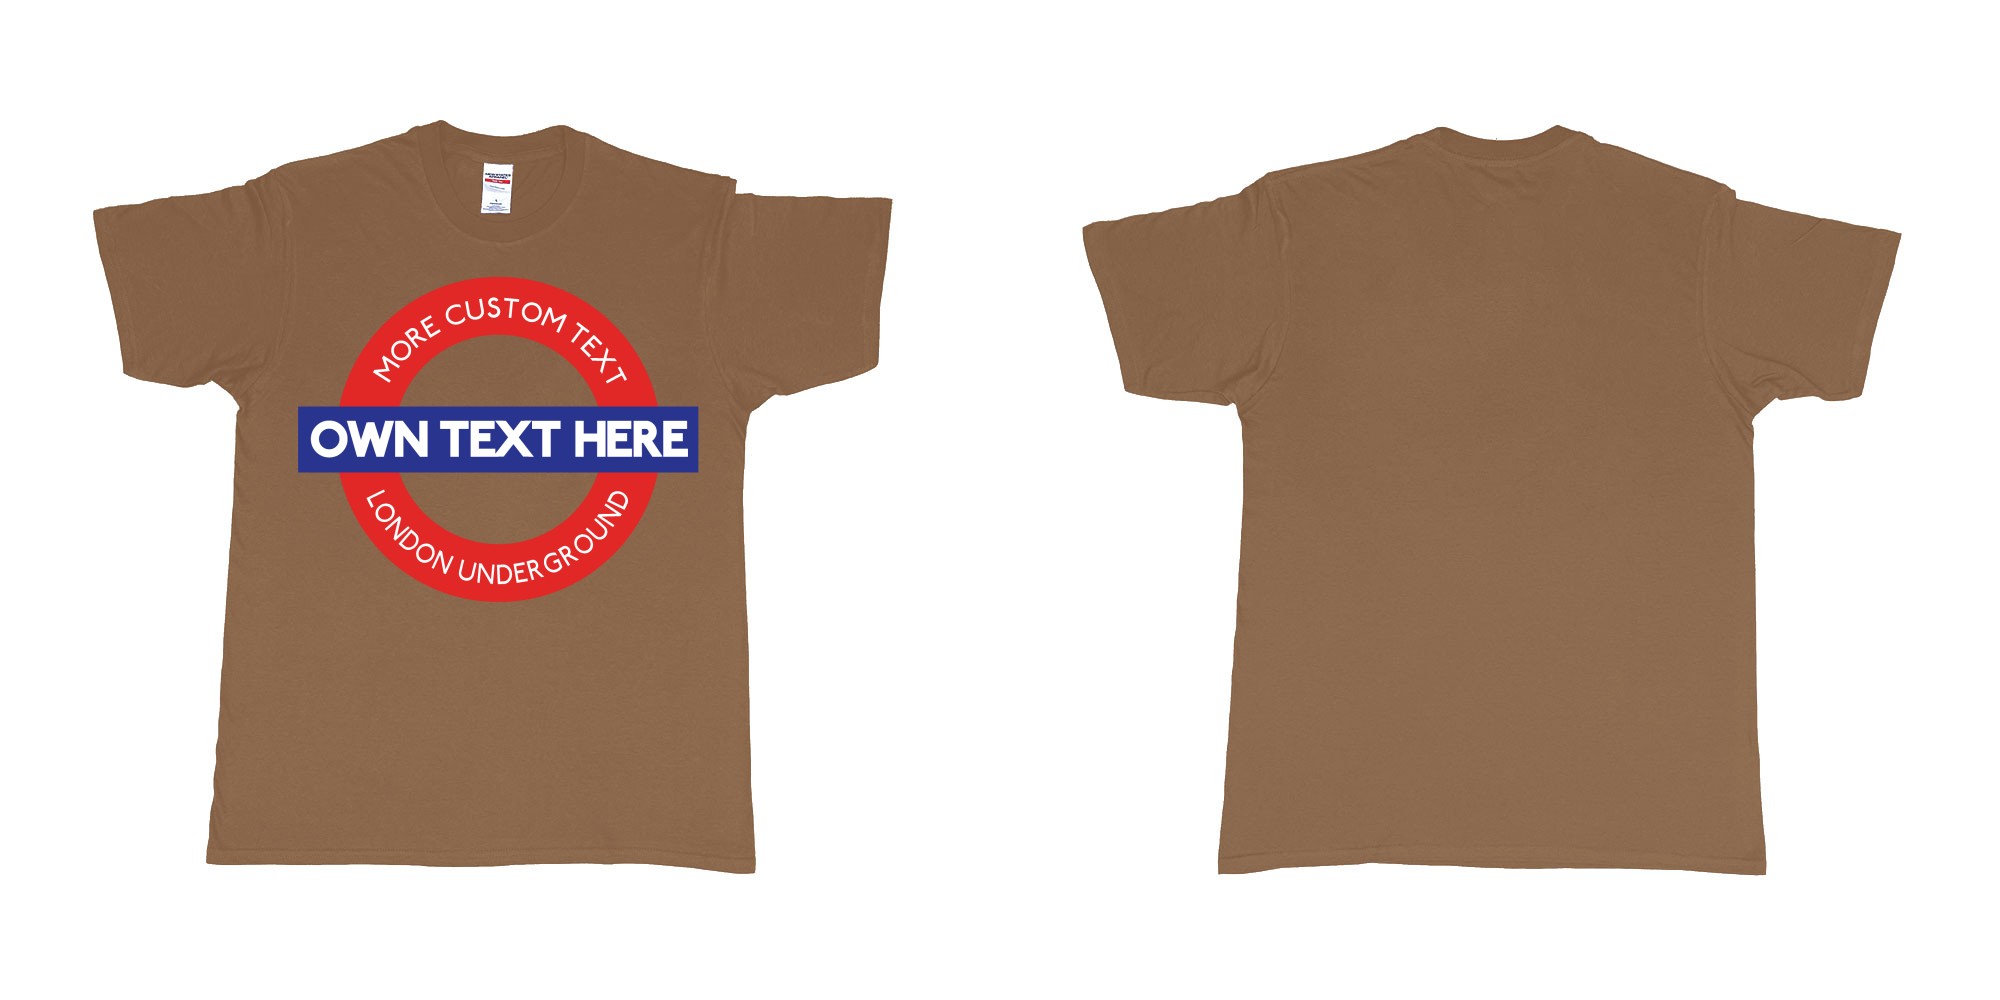 Custom tshirt design london underground logo custom design in fabric color chestnut choice your own text made in Bali by The Pirate Way